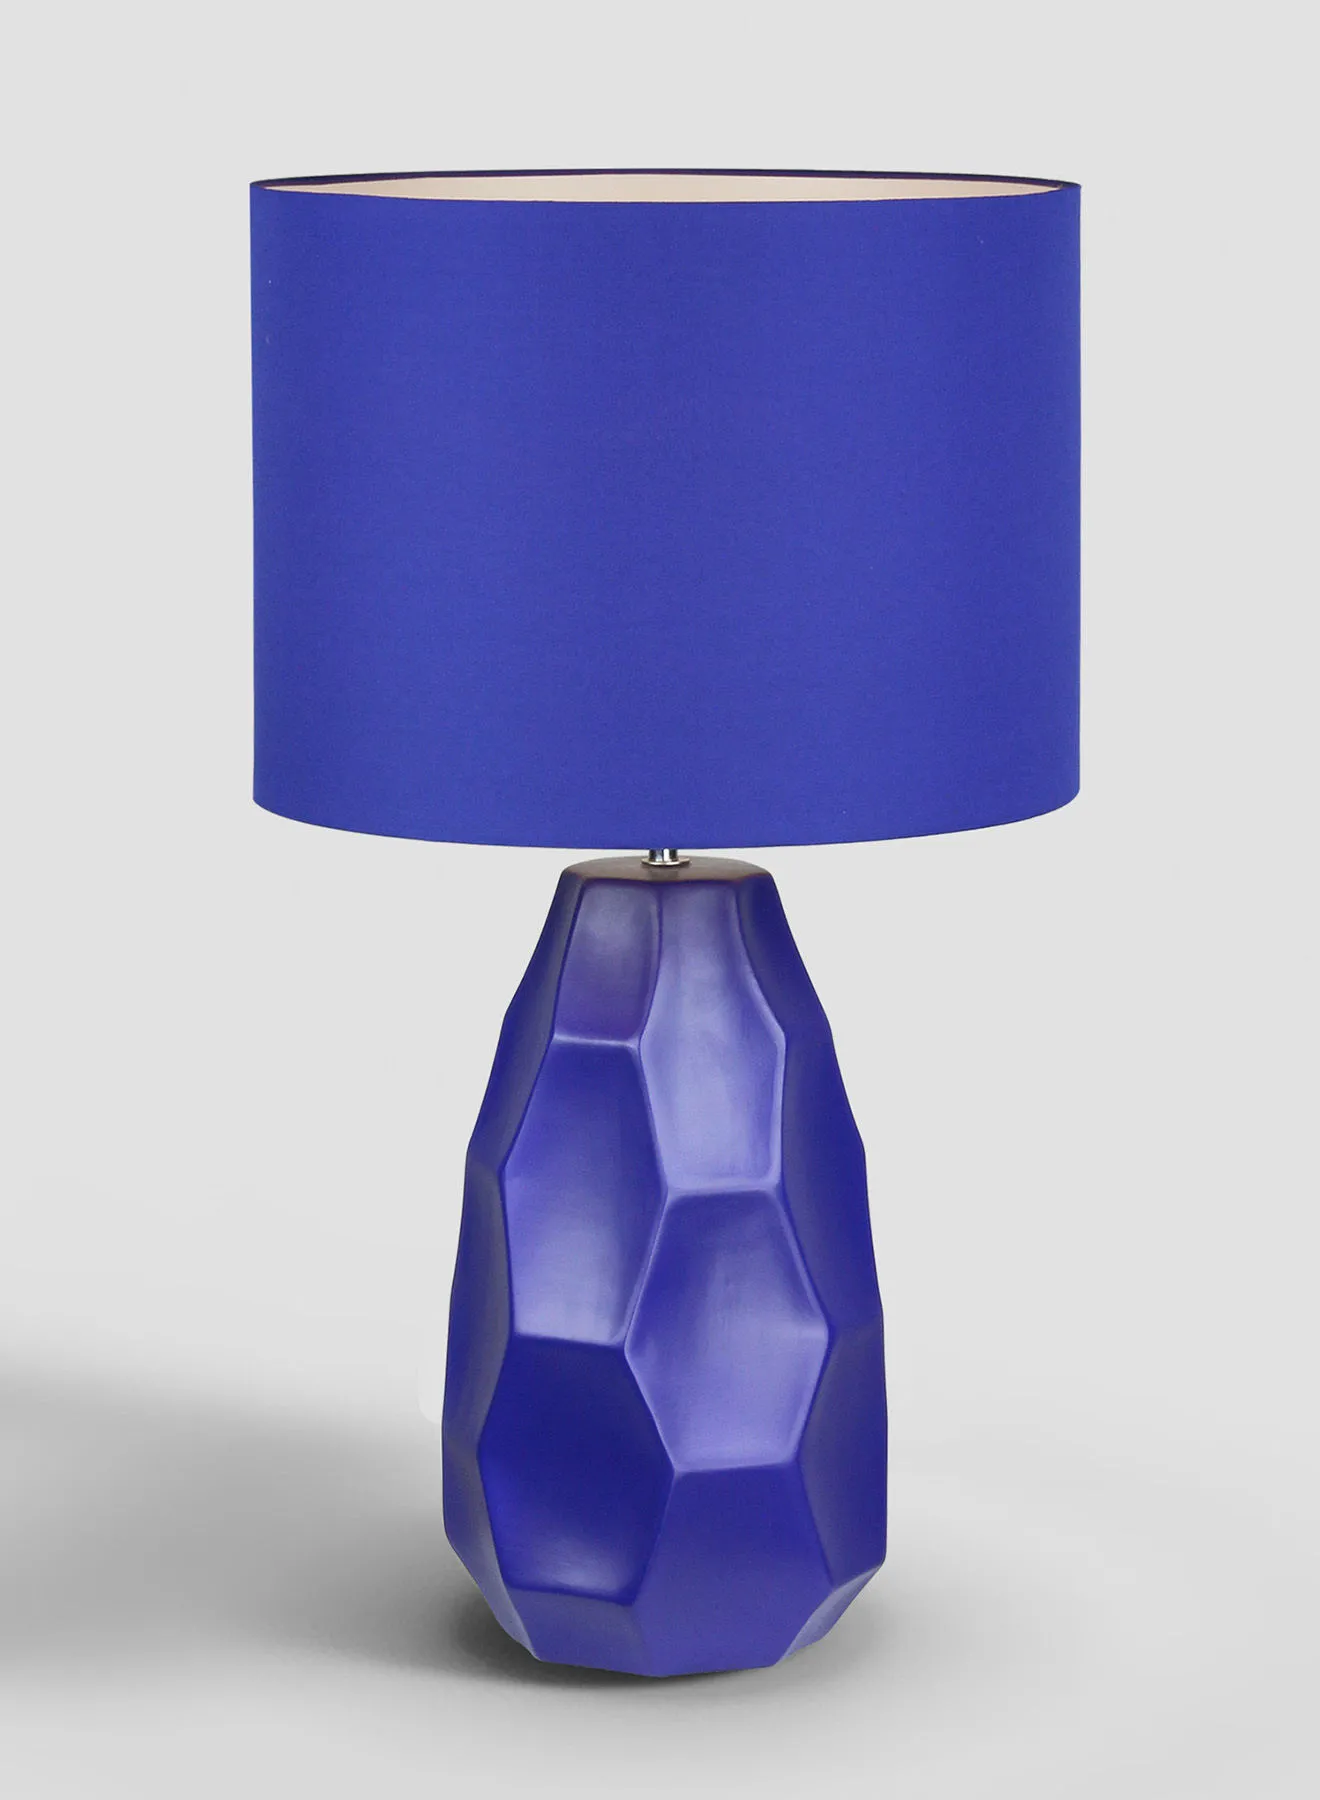 Switch Hexagon Ceramic Table Lamp Unique Luxury Quality Material for the Perfect Stylish Home AT17171 Blue 34 x 60.5 Blue 34 x 60.5cm